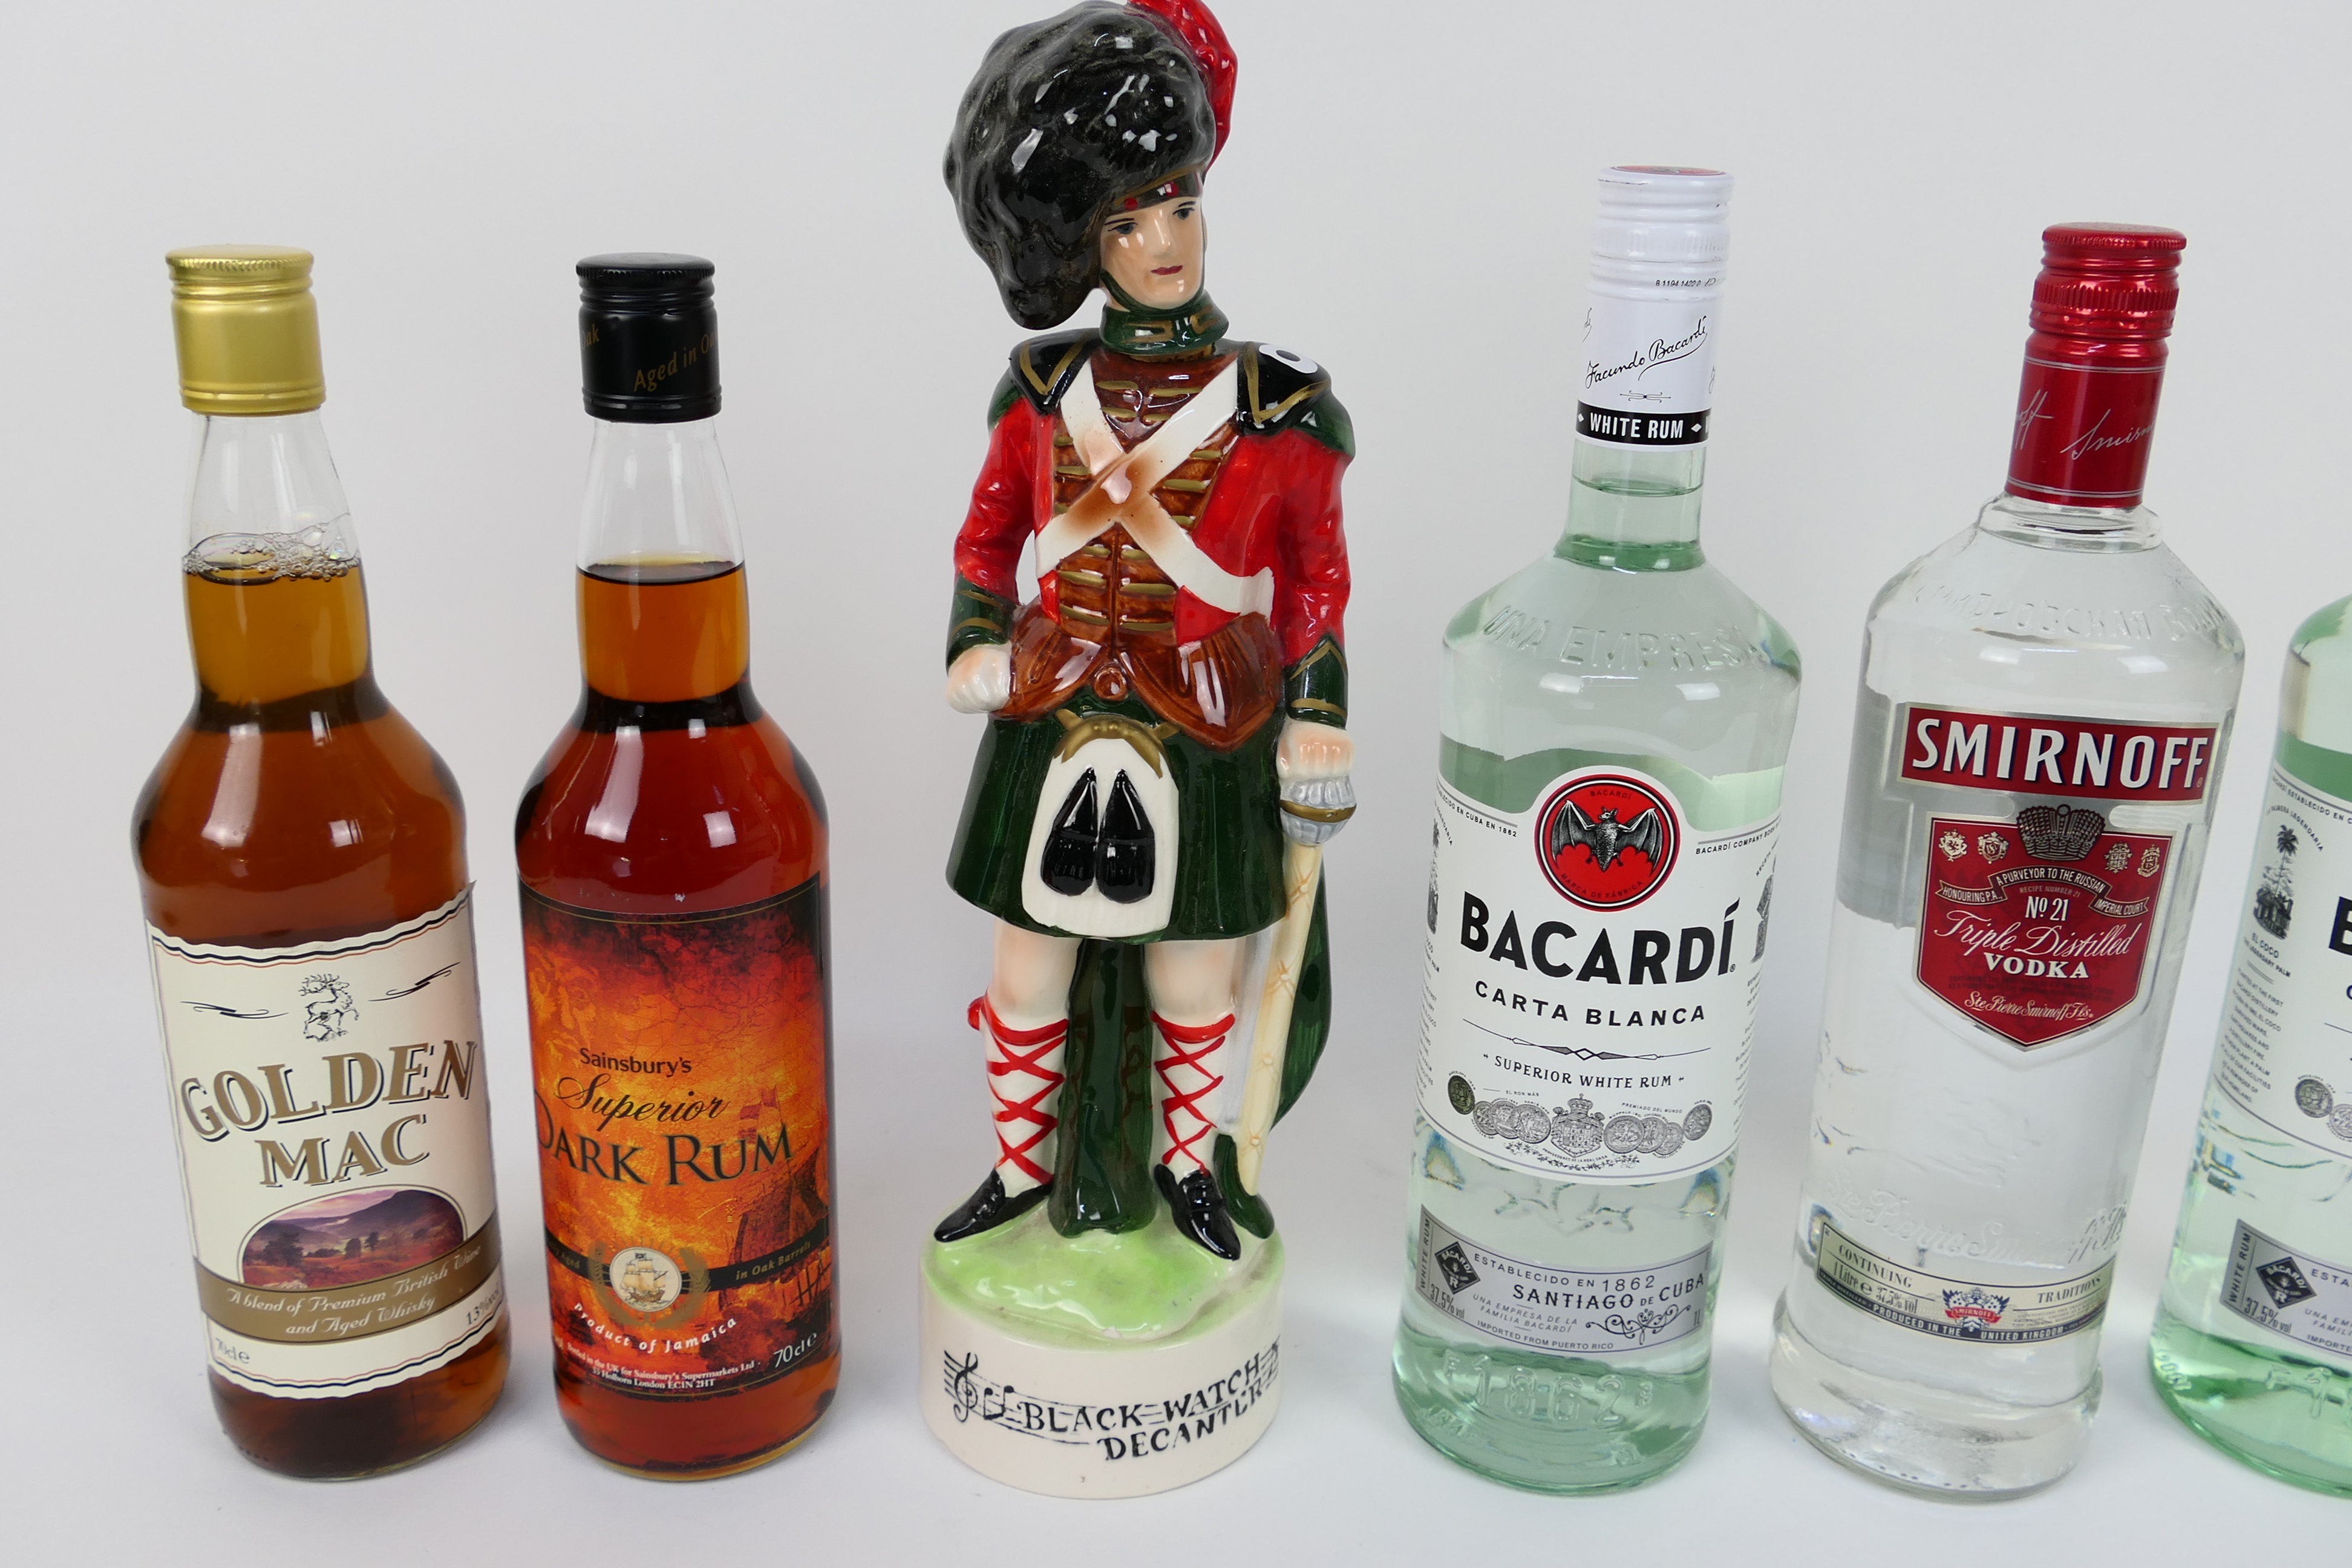 Spirits to include two 1 litre bottles of Bacardi white rum, a 1 litre bottle of Smirnoff vodka, - Image 2 of 3